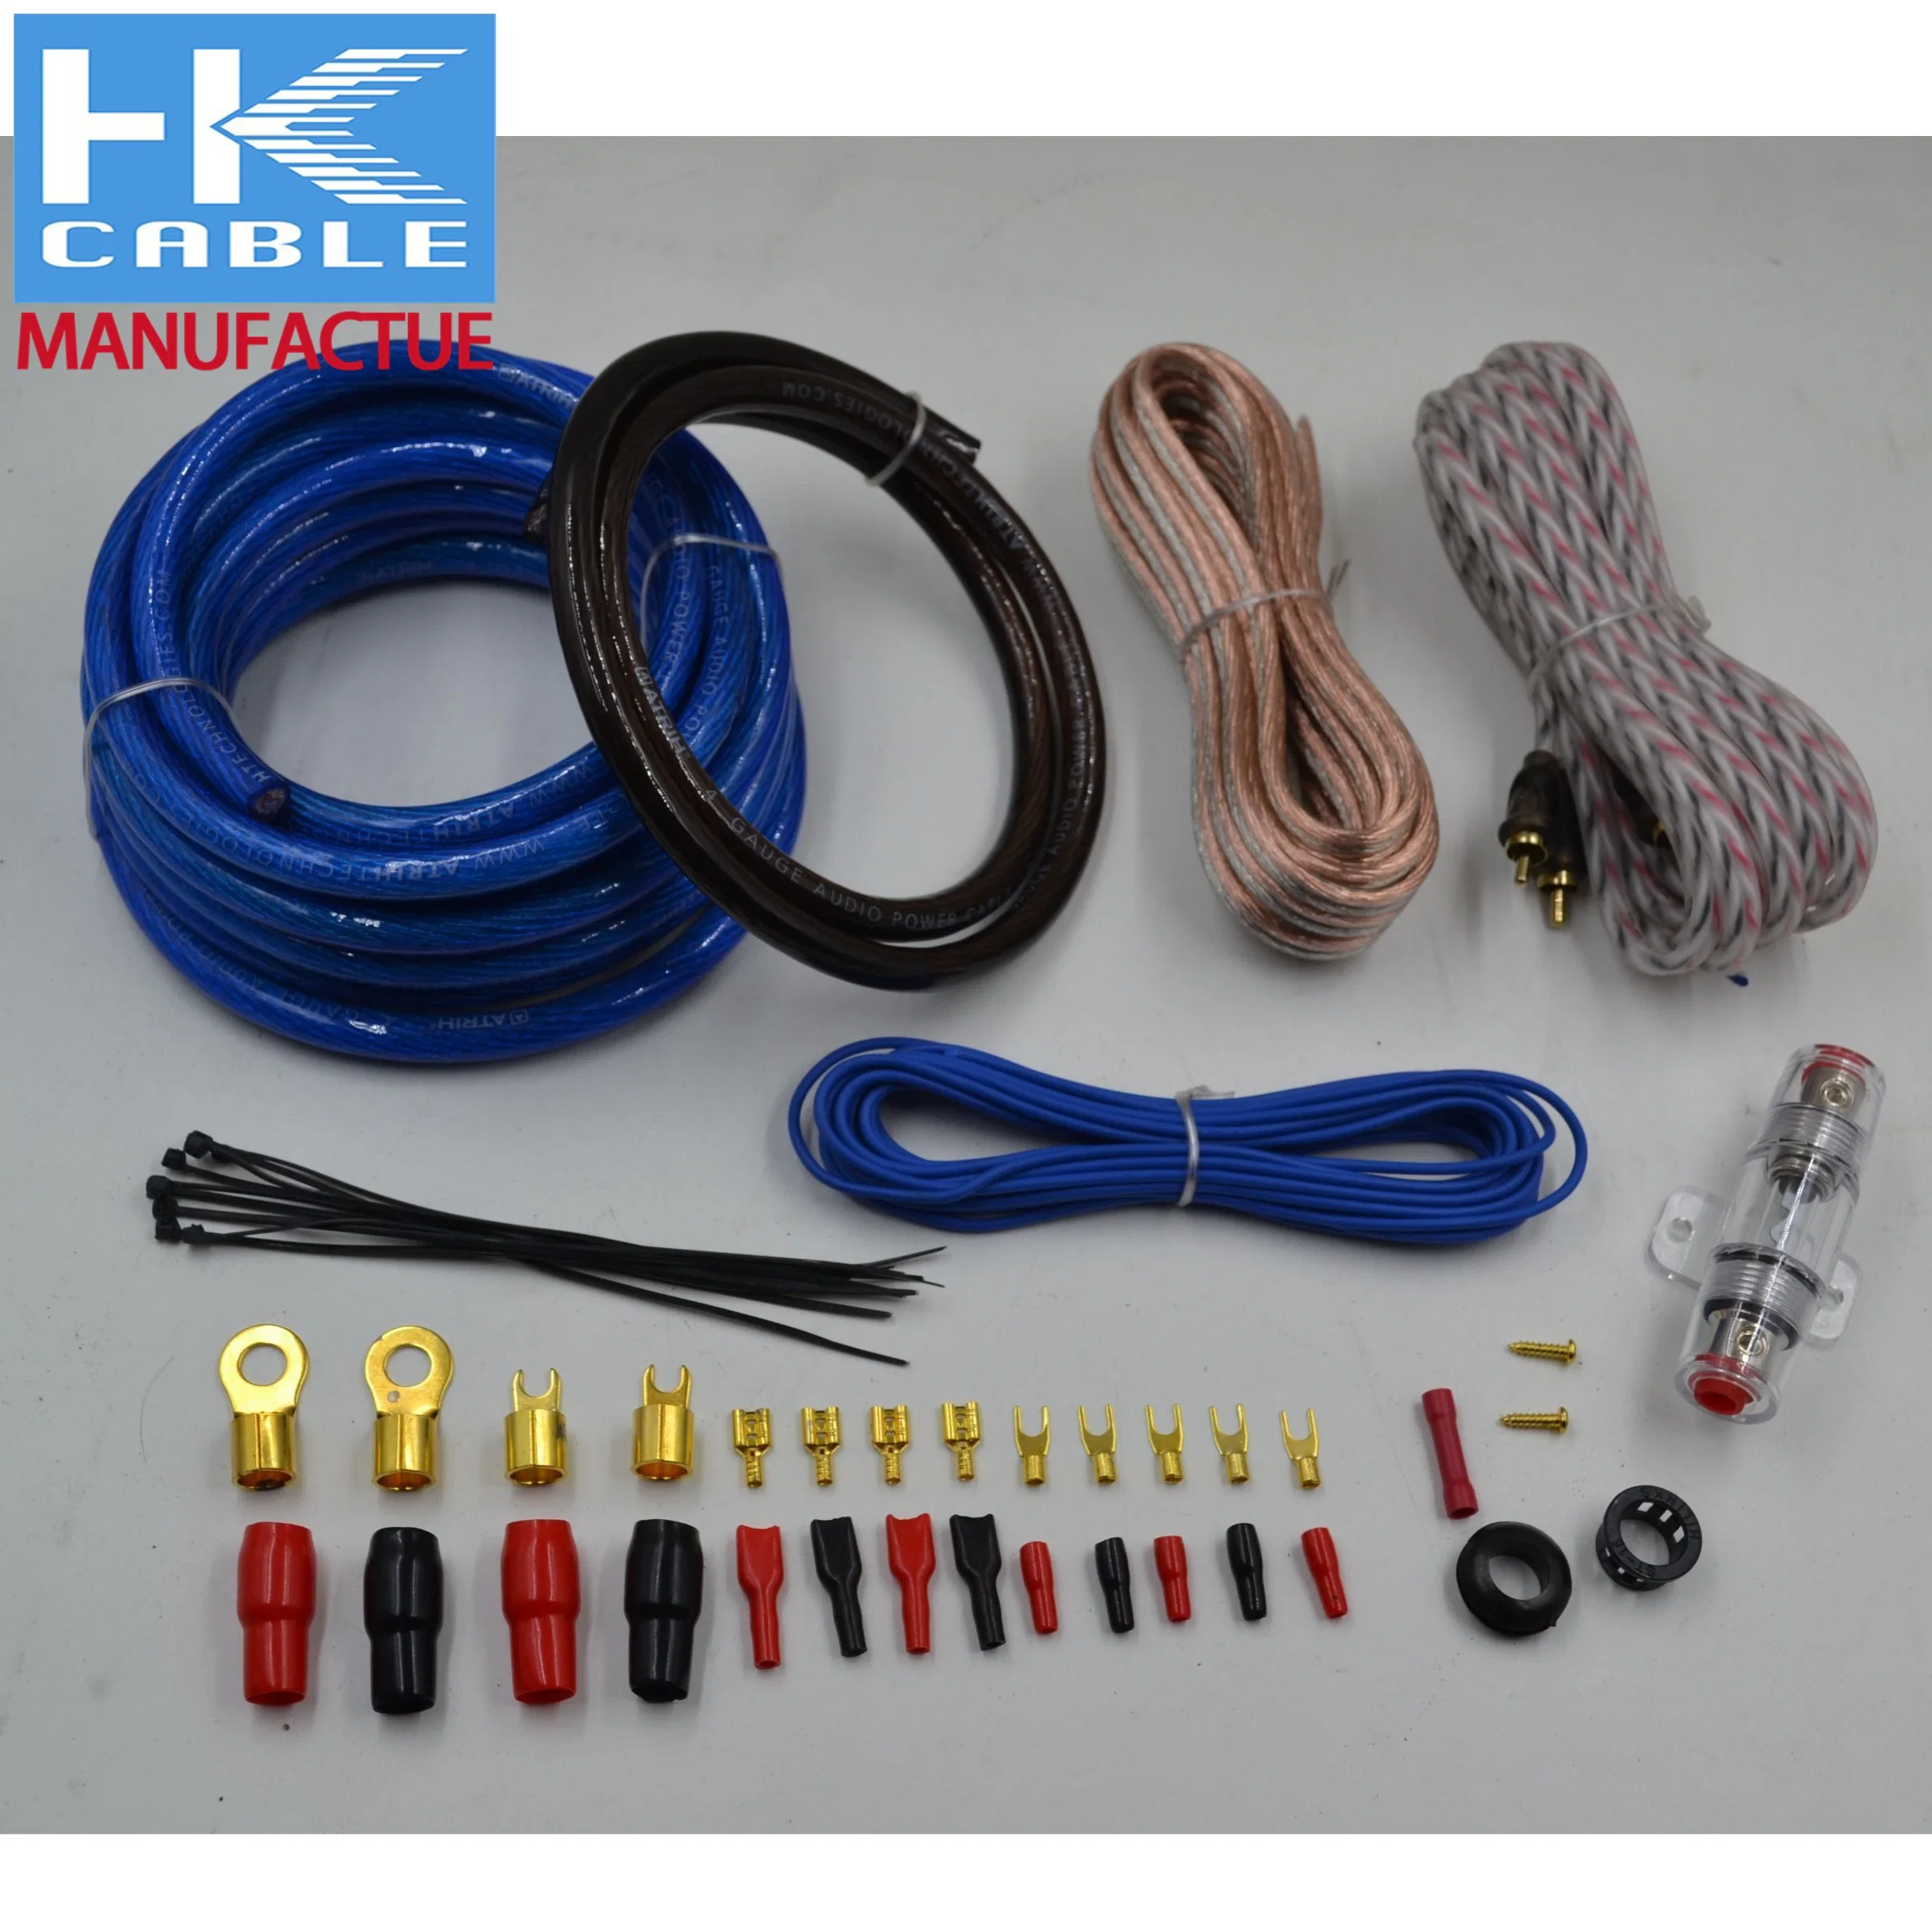 Car Amplifier Install Wiring Kit Car Amplifier Wiring Kits 8 Gauge Amplifier Installation Kit Car Cable Set